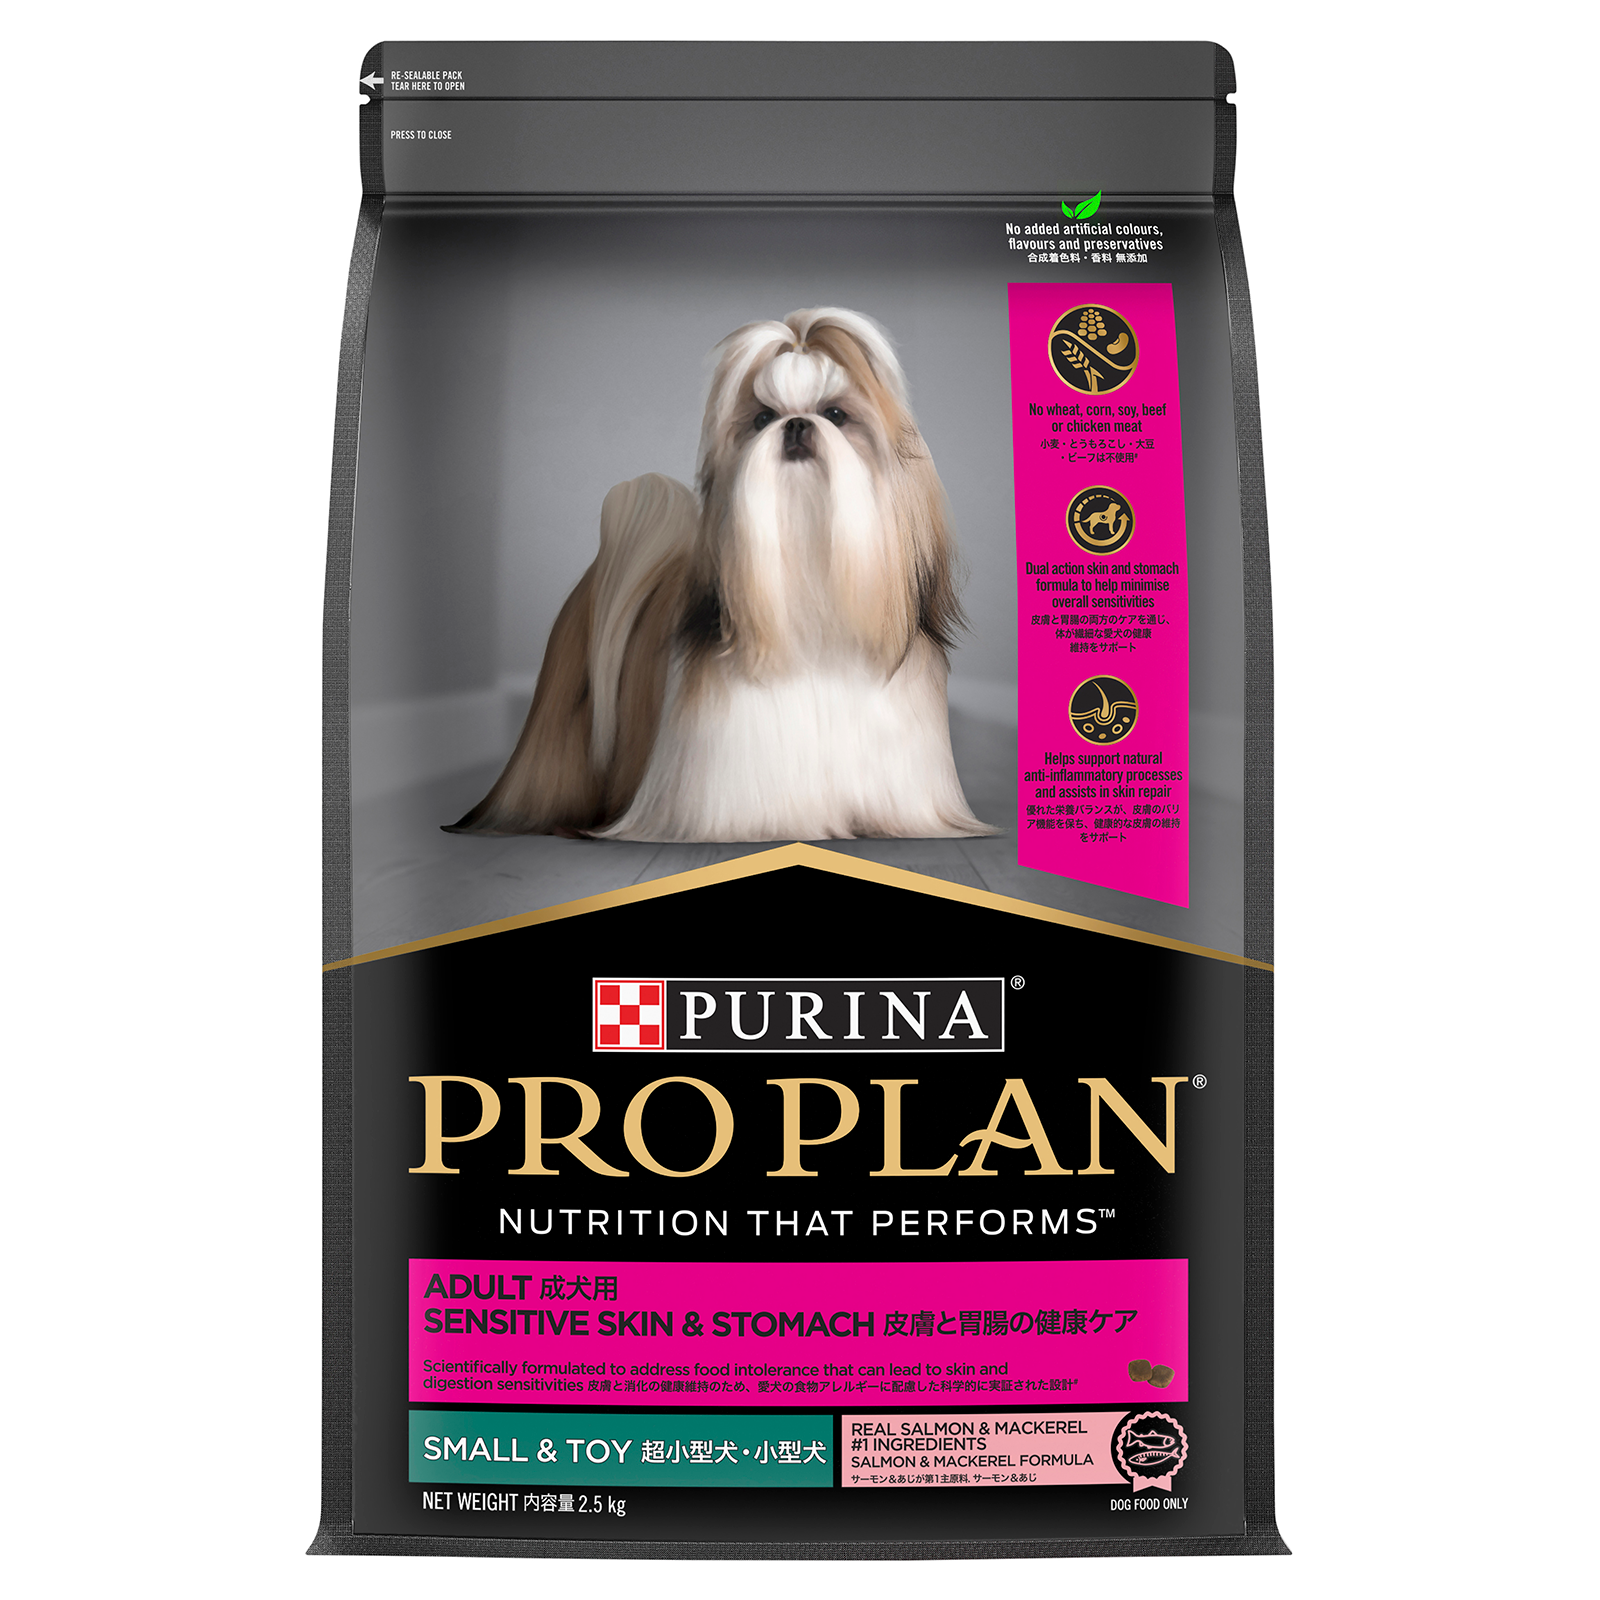 Pro Plan Dog Food Sensitive Skin & Stomach Small & Toy Breed